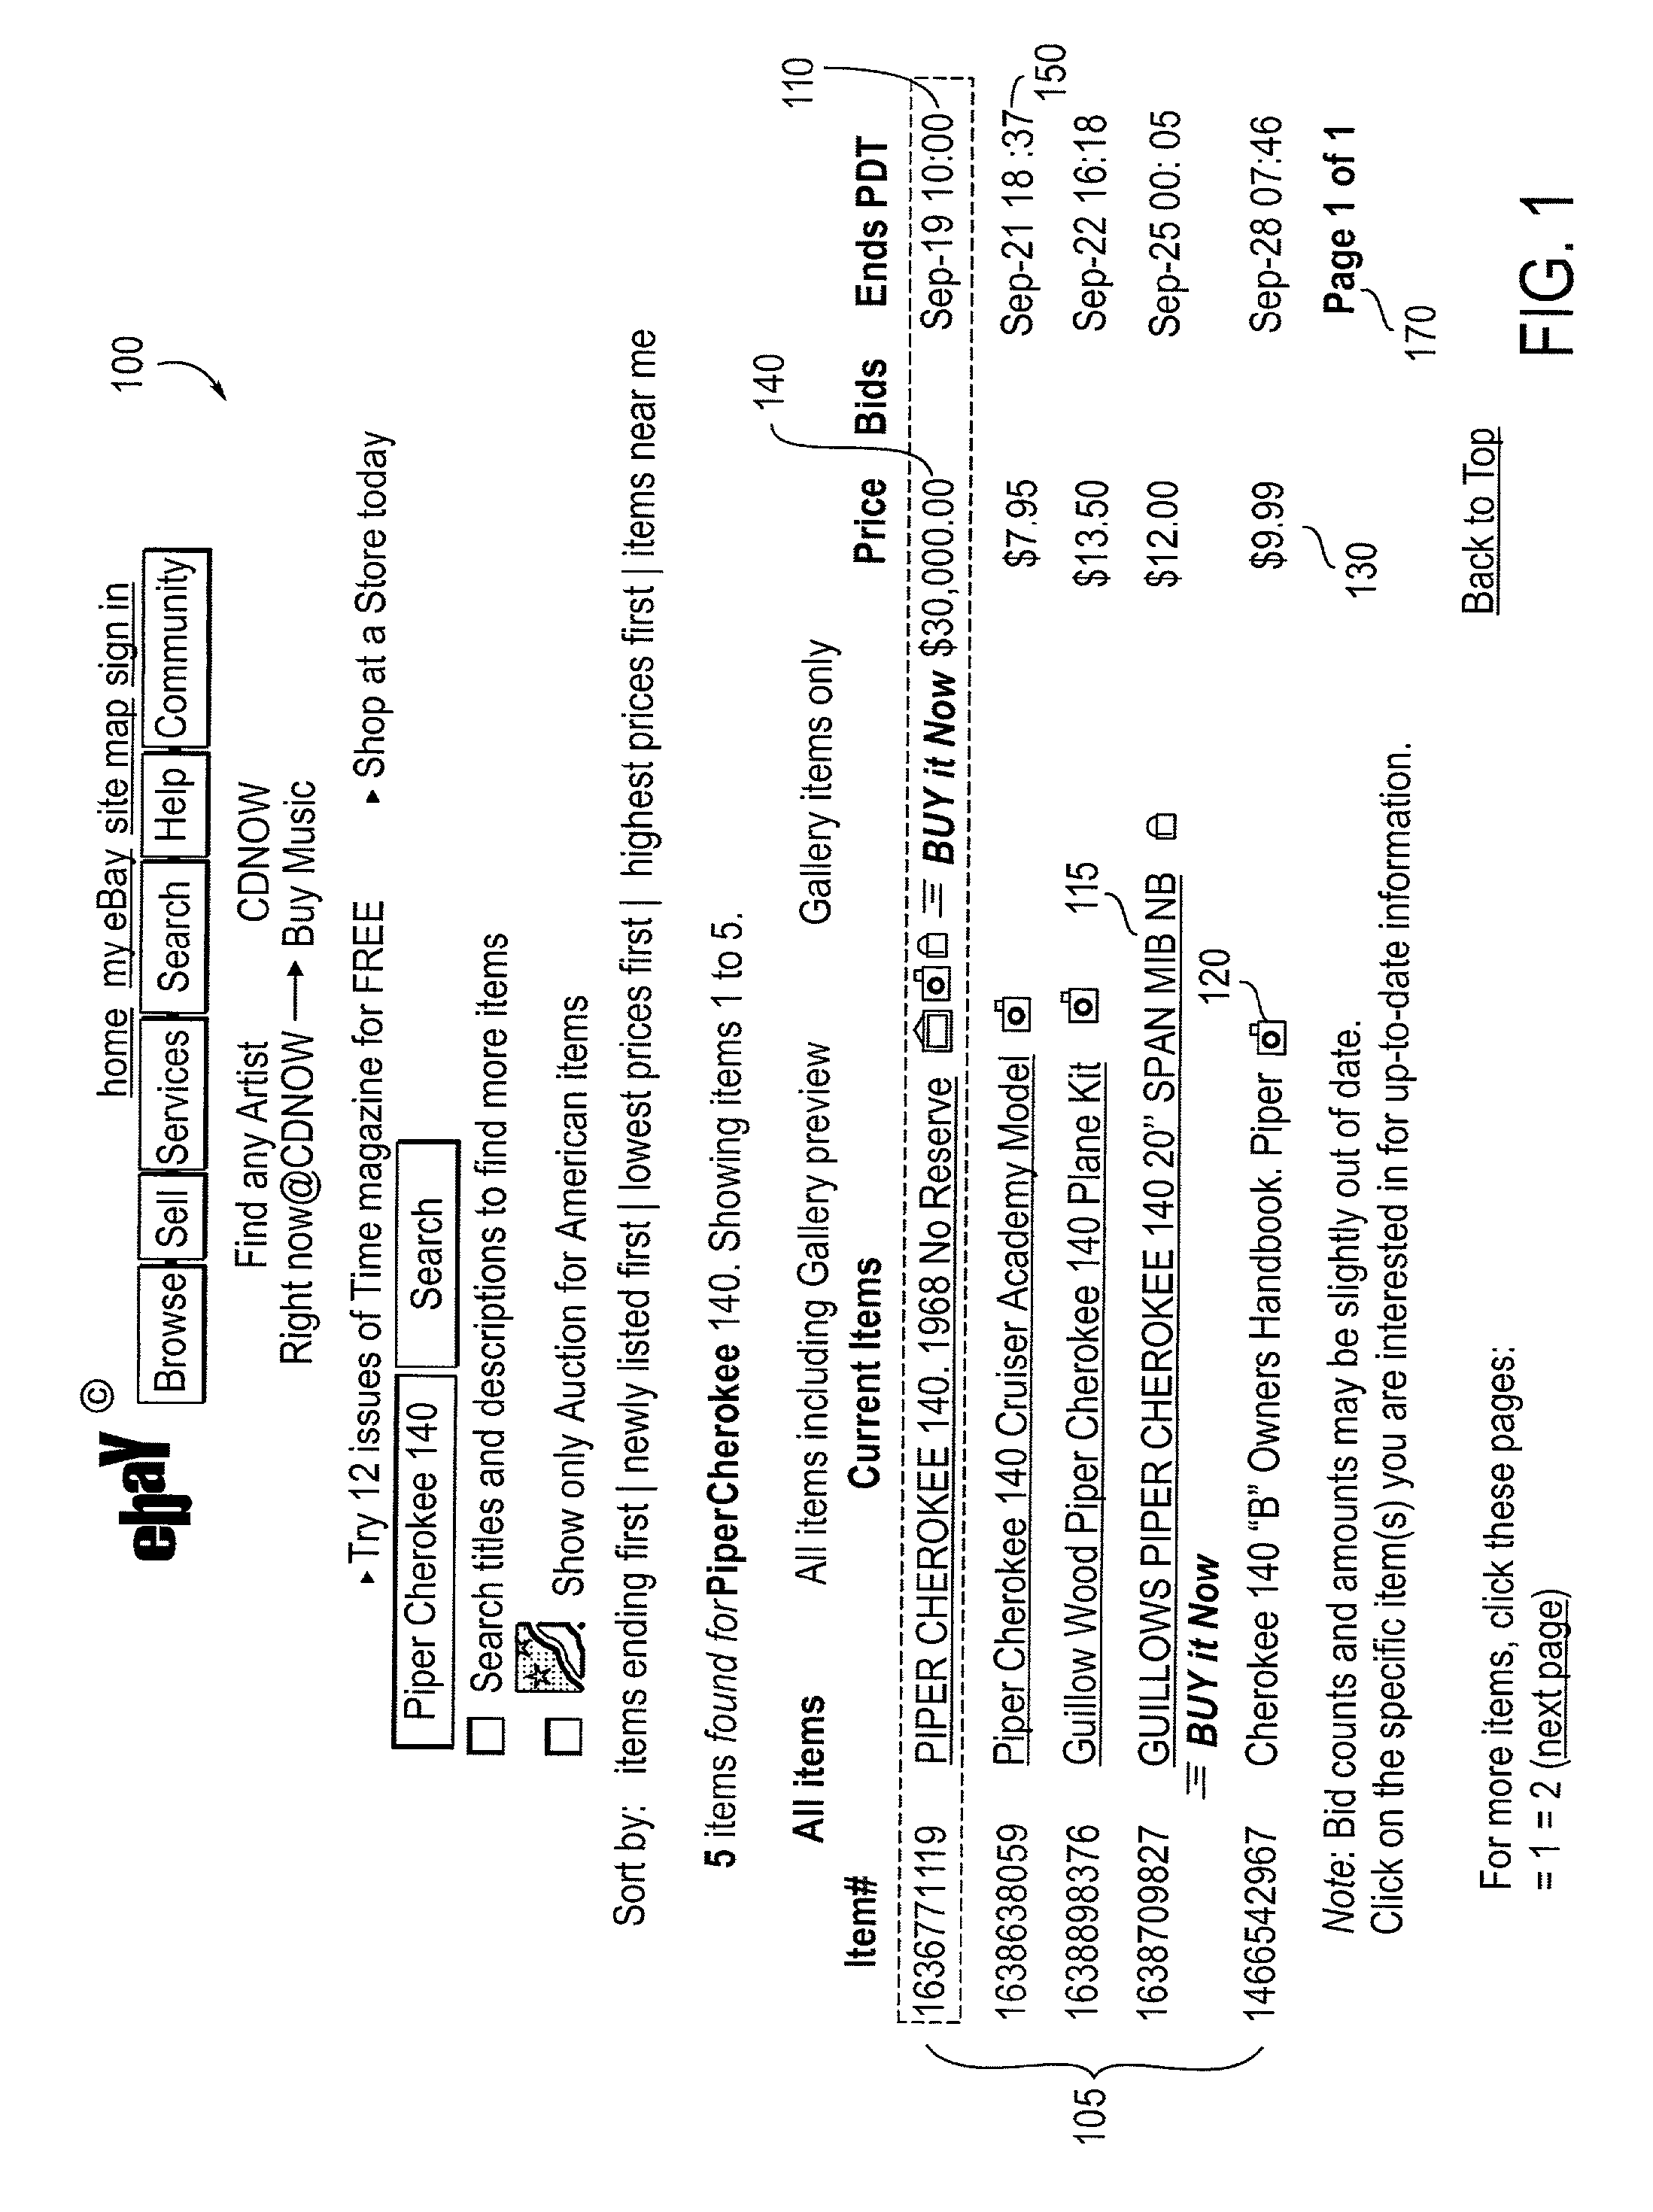 Method and system automatically to support multiple transaction types, and to display seller-specific transactions of various transaction types in an integrated, commingled listing